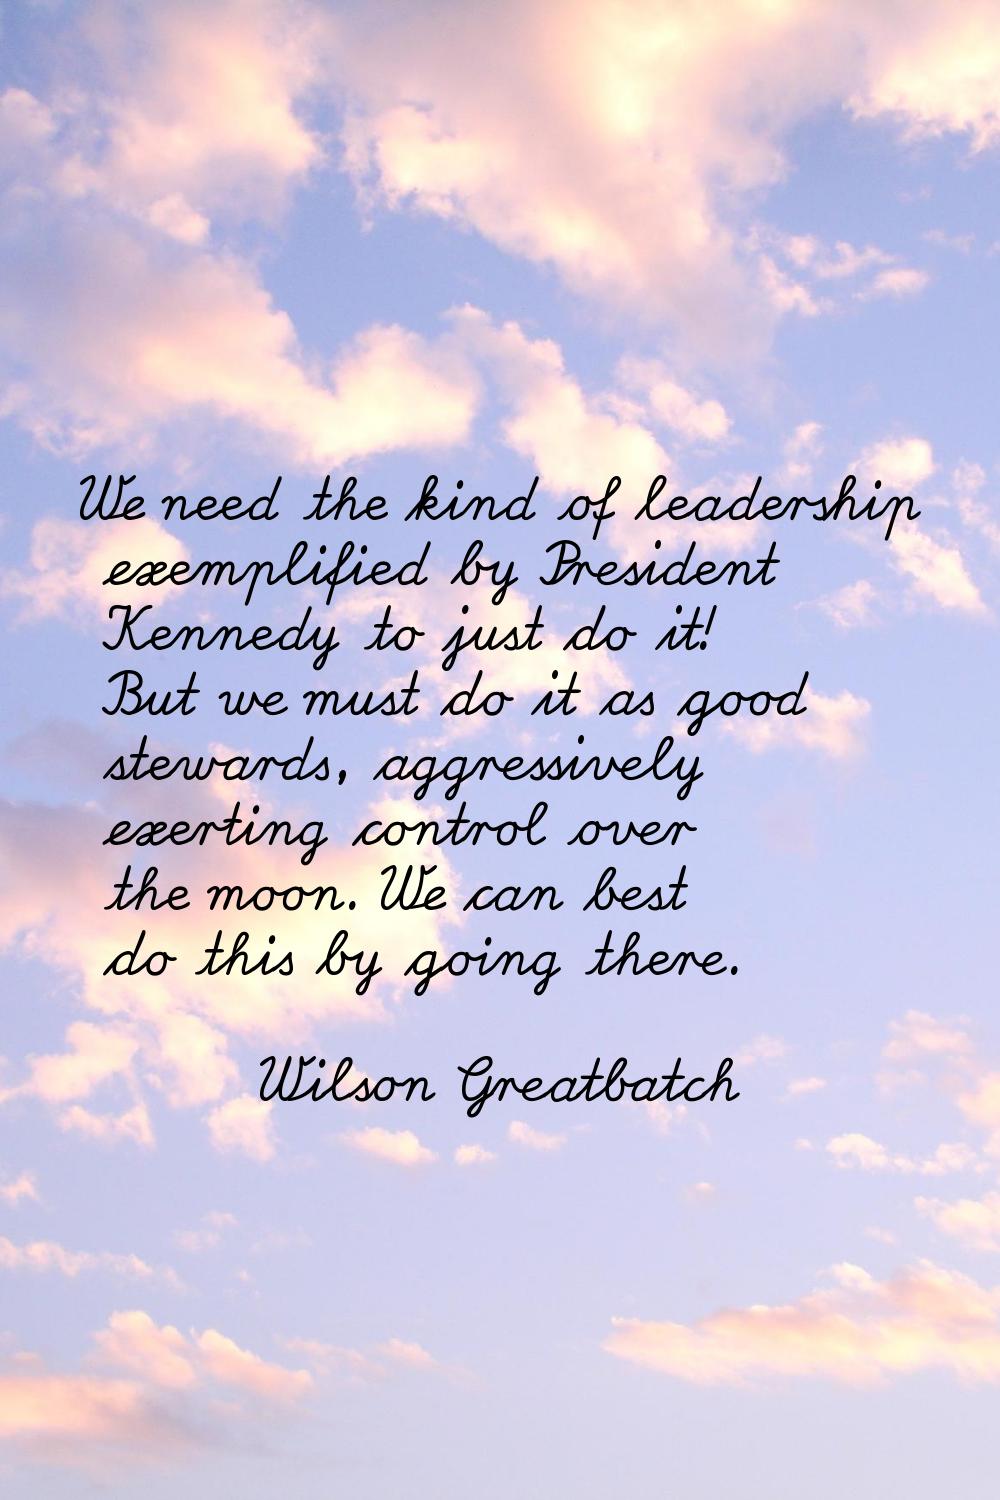 We need the kind of leadership exemplified by President Kennedy to just do it! But we must do it as